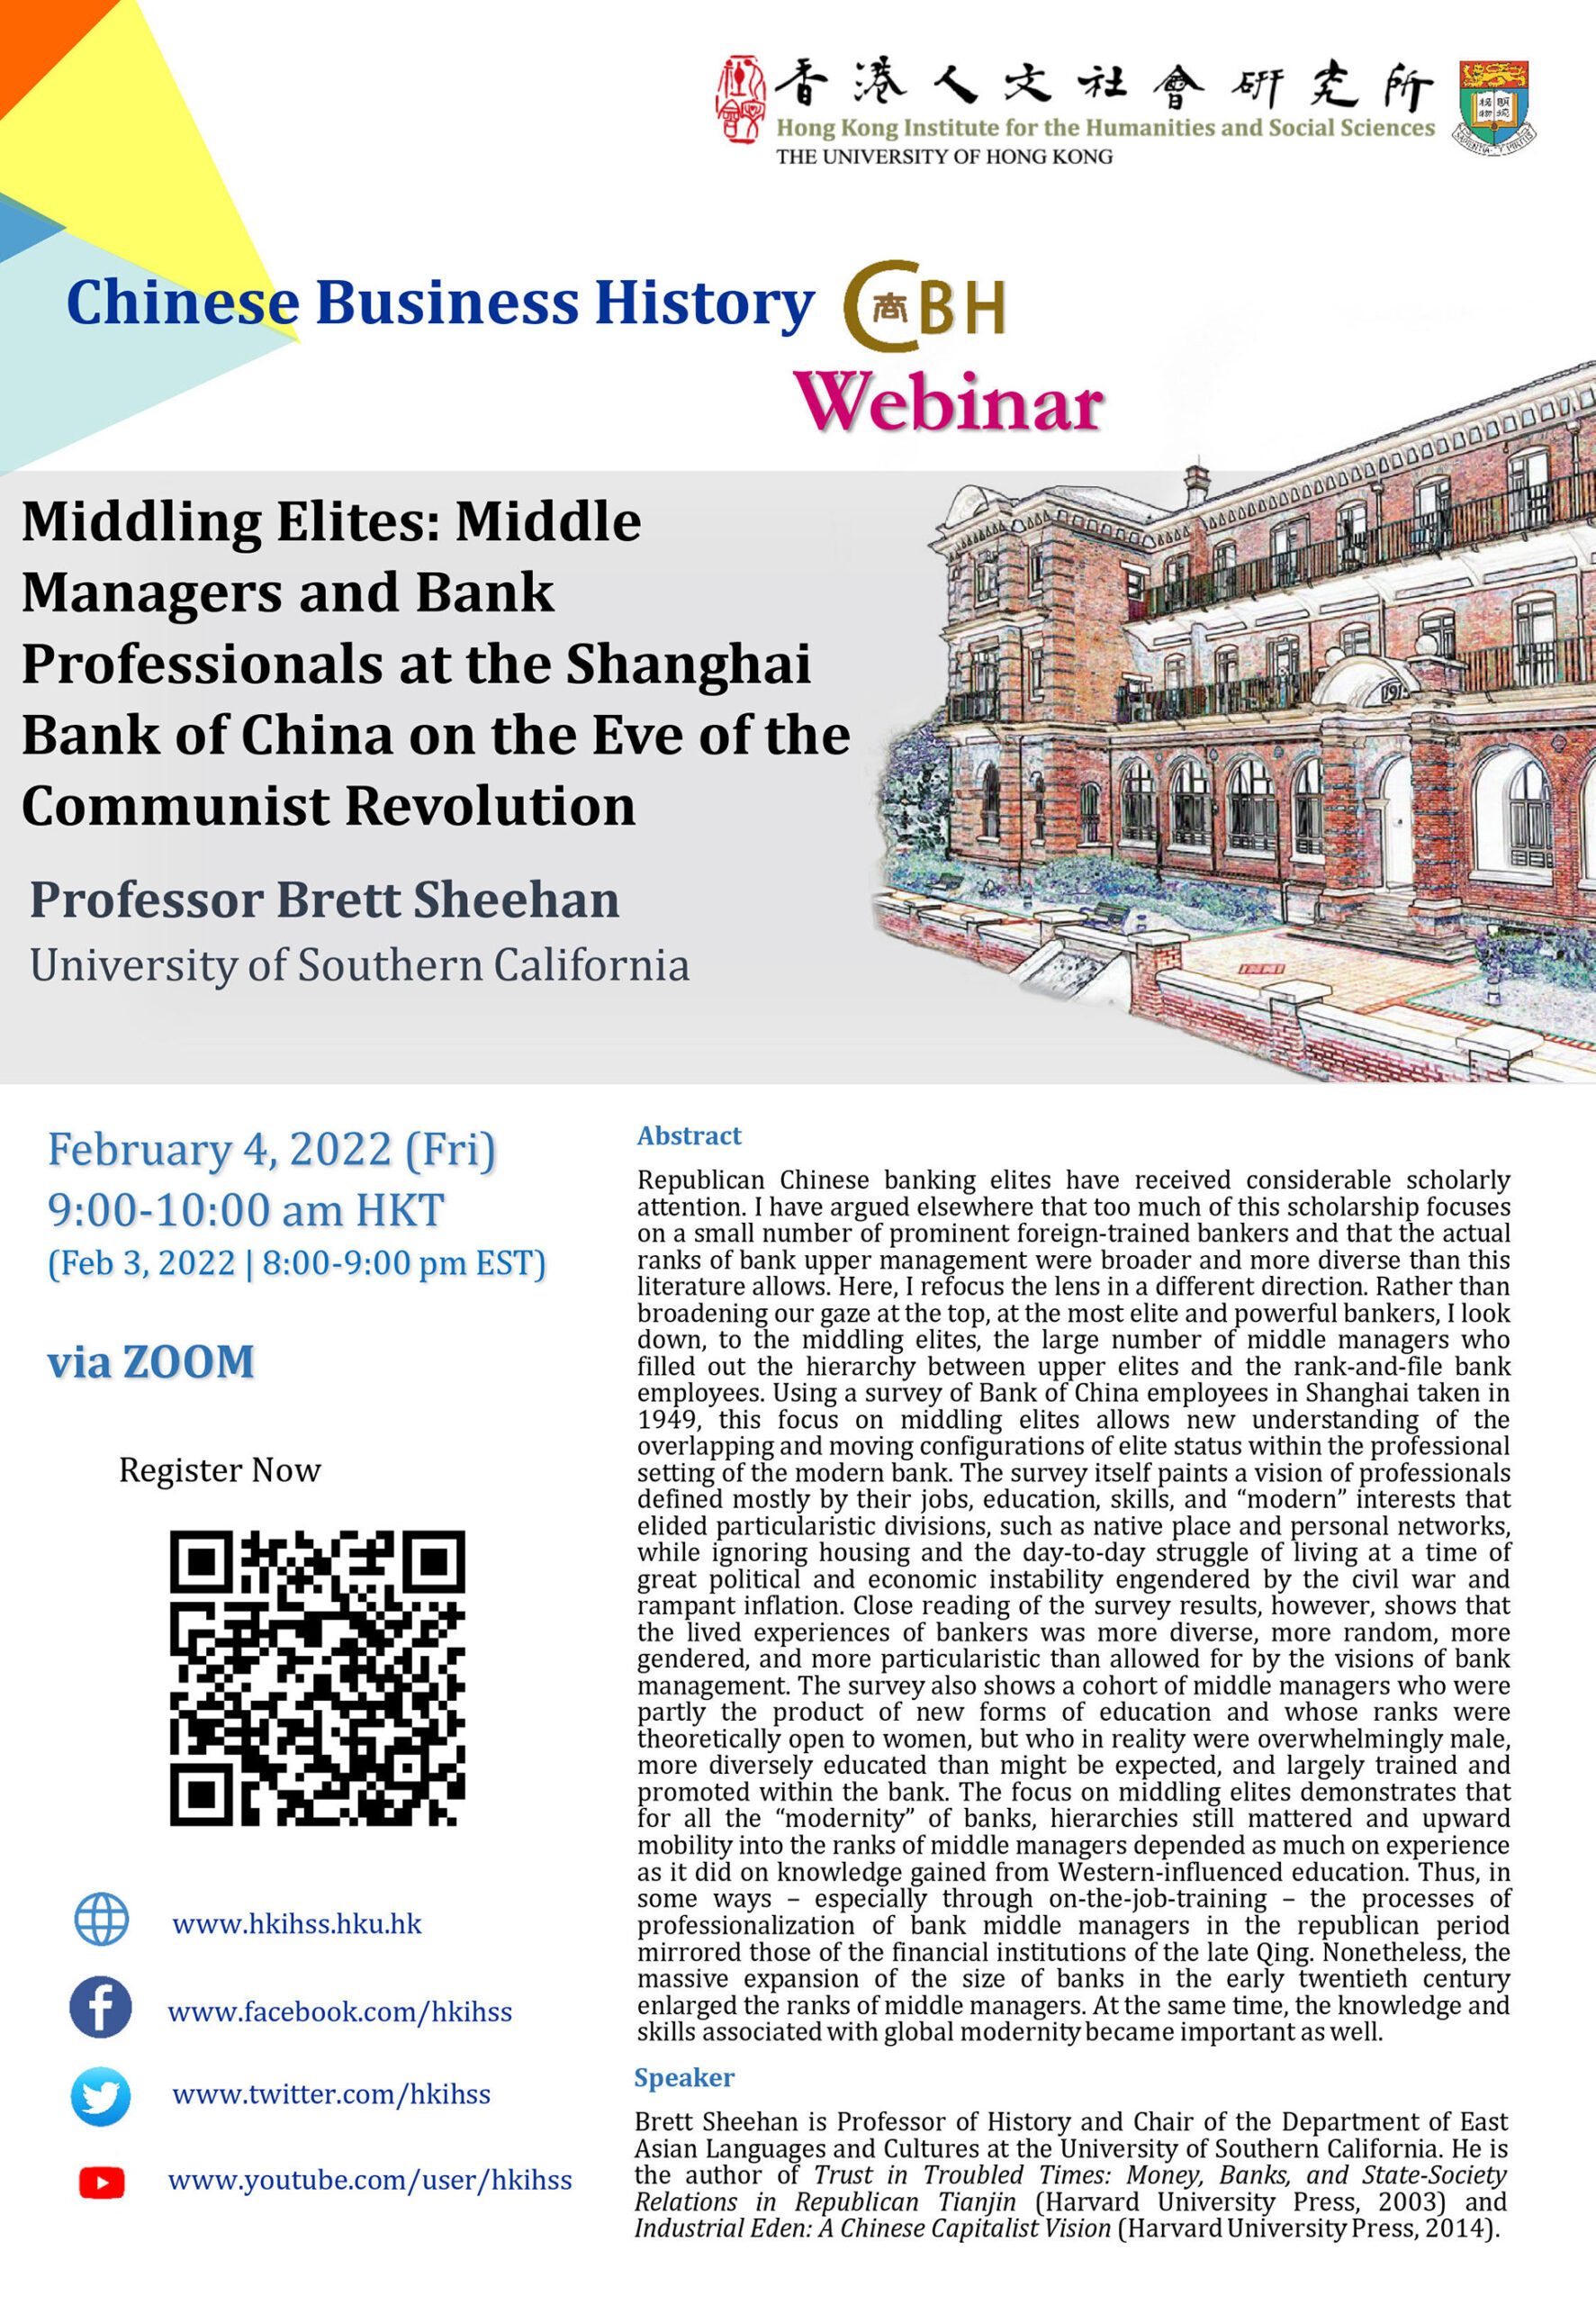 Chinese Business History Webinar on “Middling Elites: Middle Managers and Bank Professionals at the Shanghai Bank of China on the Eve of the Communist Revolution” by Professor Brett Sheehan (February 4, 2022)